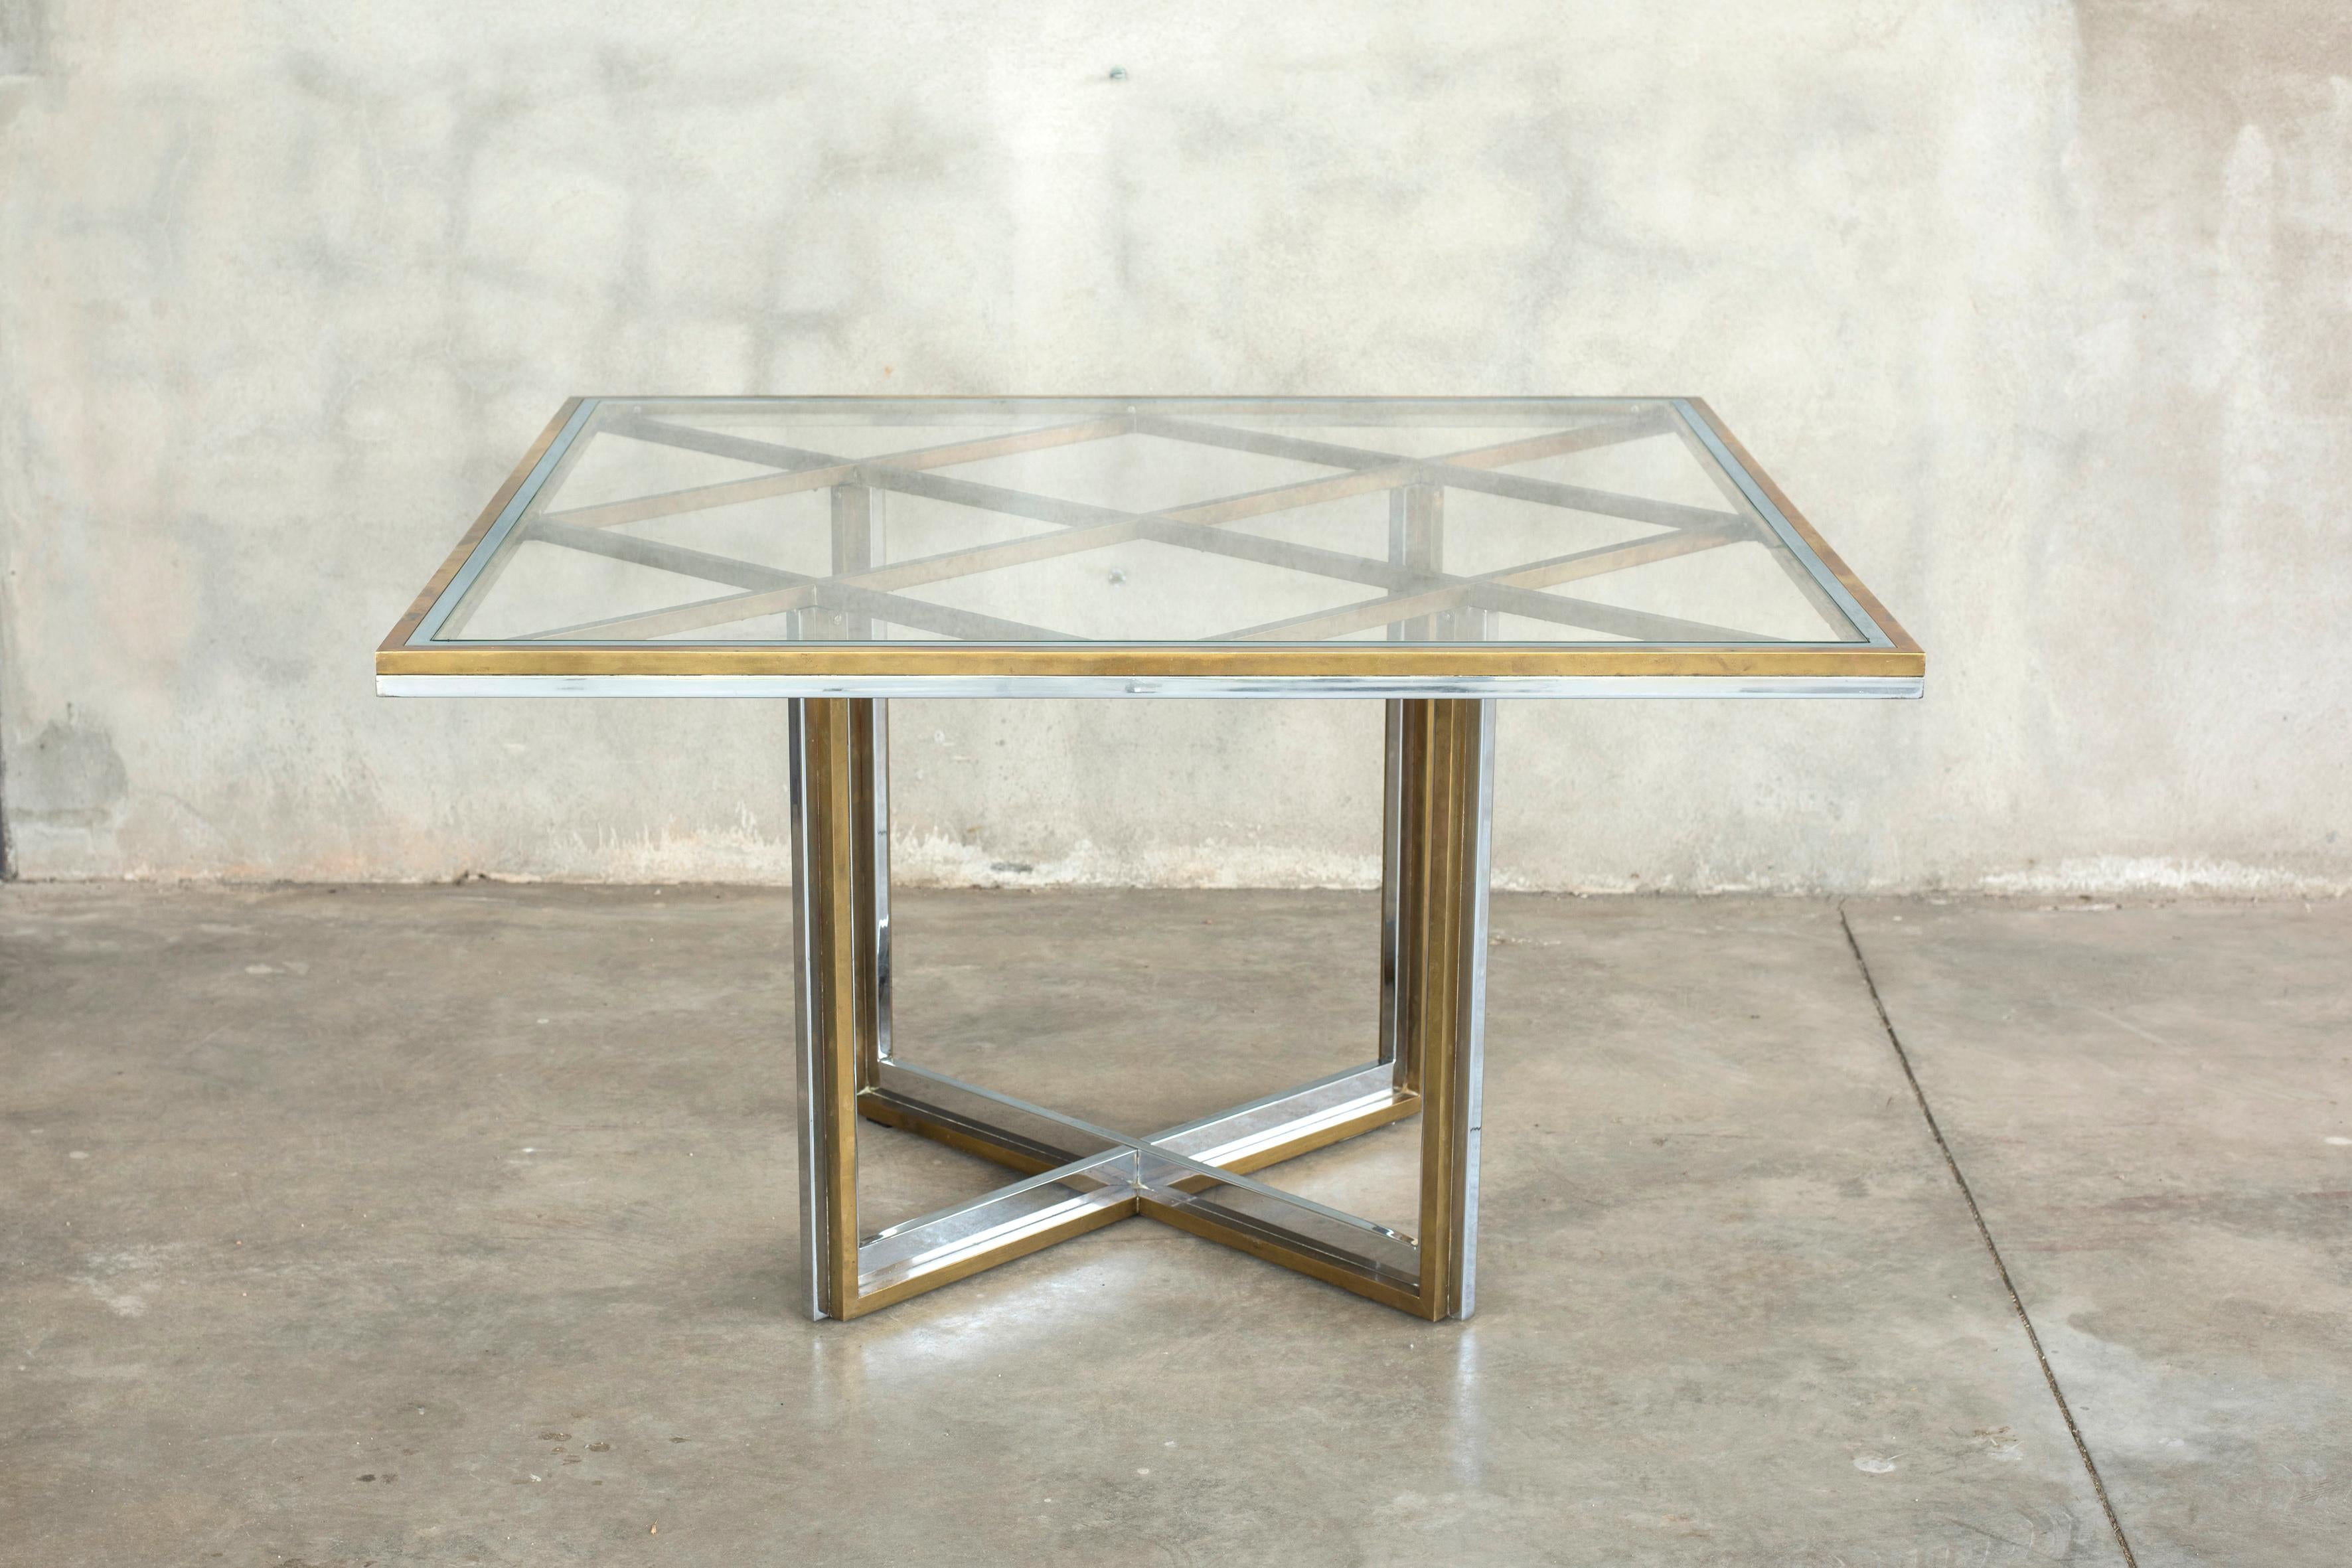 Squared brass and chromed steel crystal tempered top table Romeo Rega style
Italy 1960s manner of Crespi and Rega designers.
Very charming table both for kitchens and foyers. 
Size 140 x 140 cm H 72 cm
A video is available upon request.
New